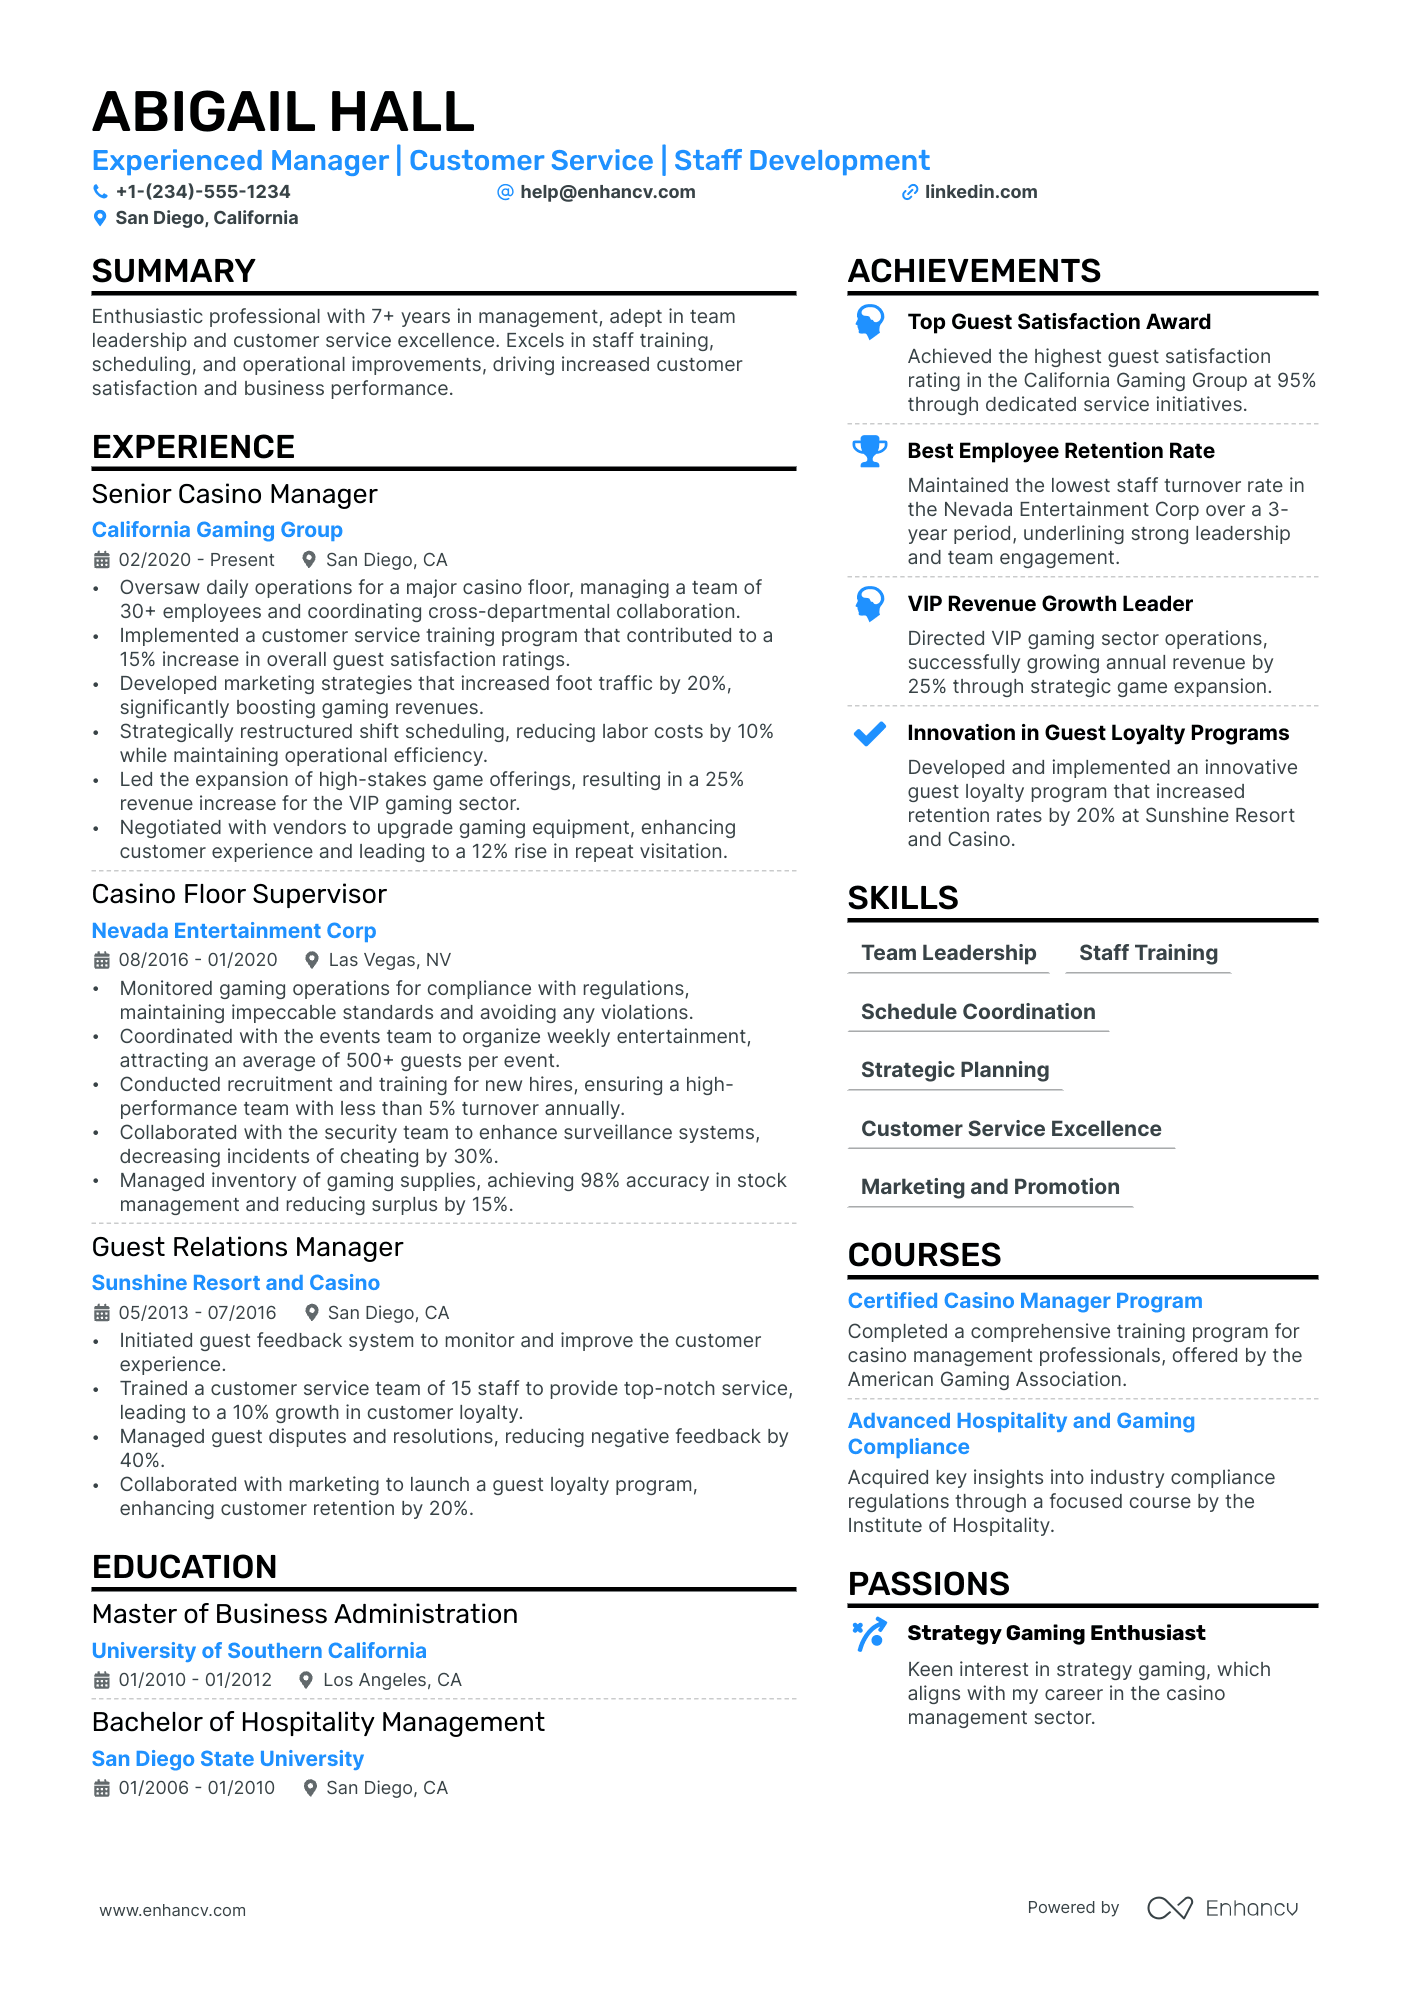 Casino Manager resume example